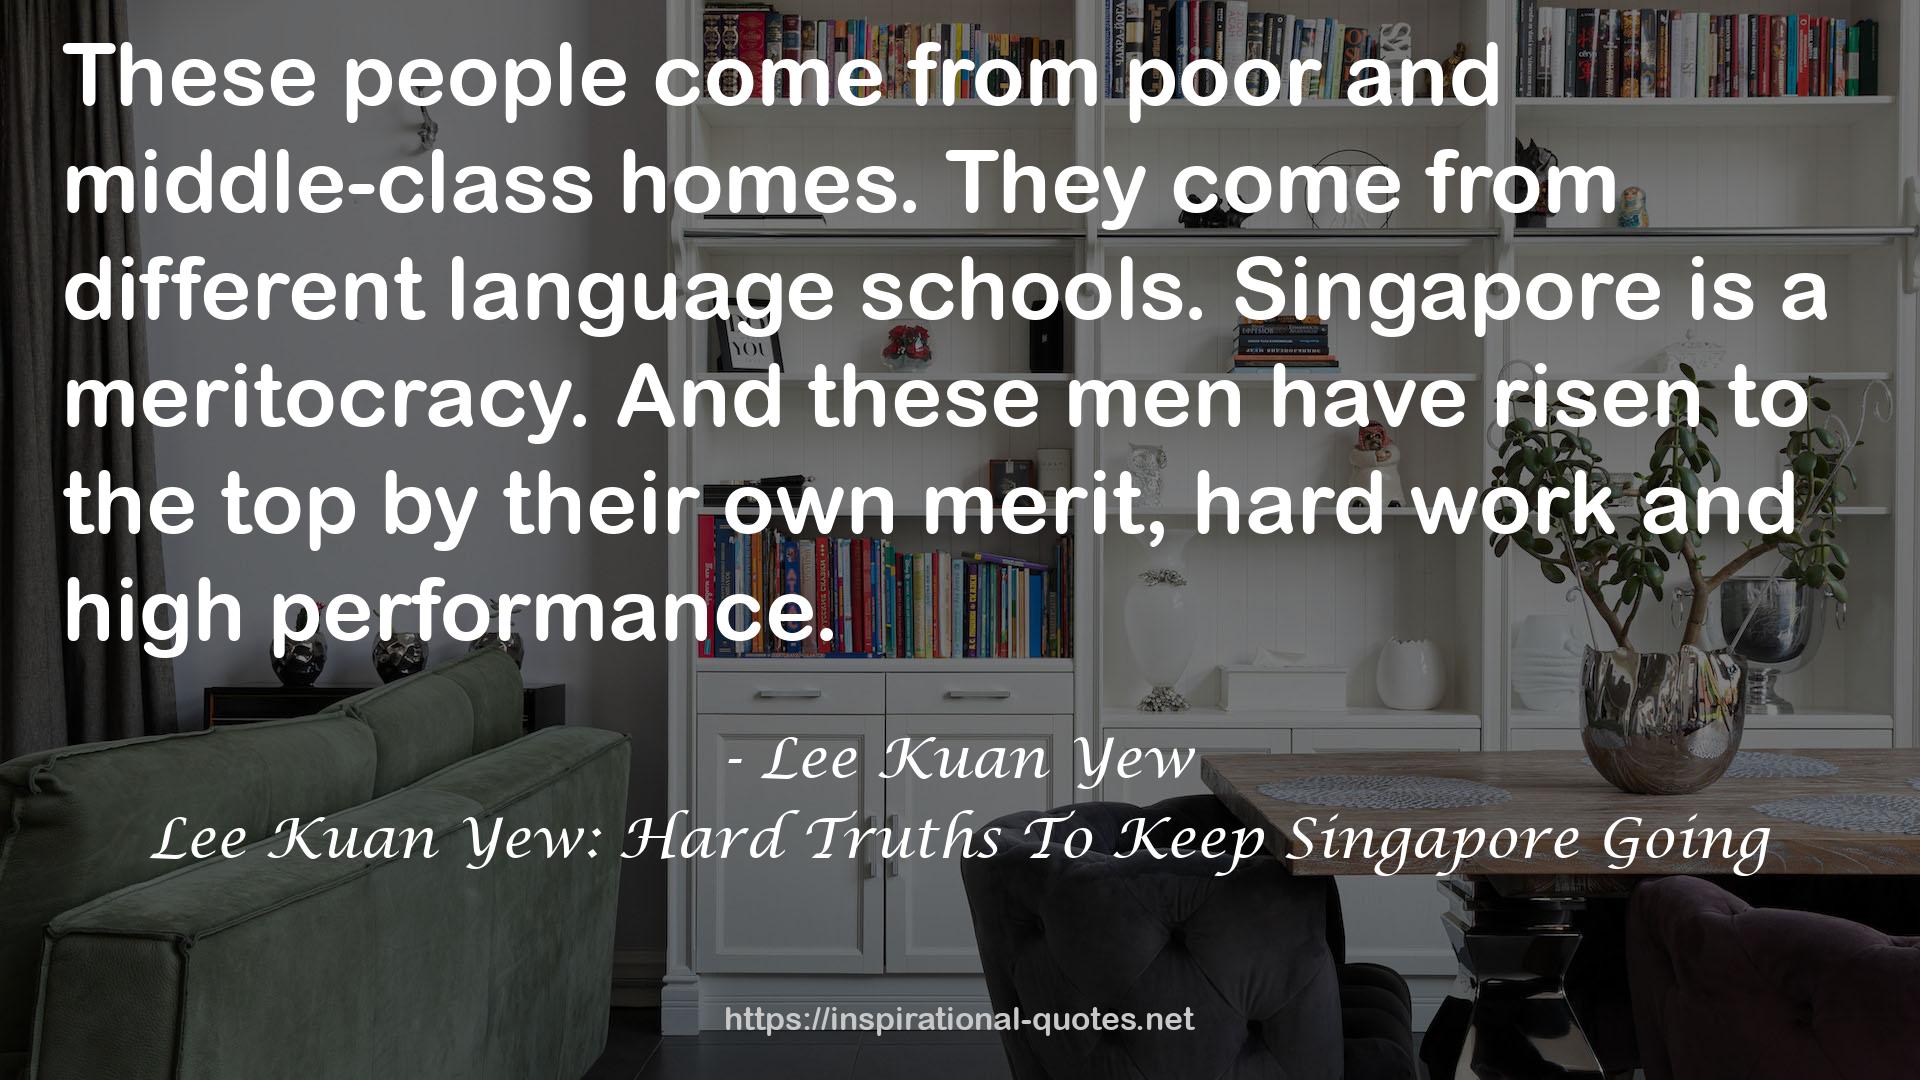 Lee Kuan Yew: Hard Truths To Keep Singapore Going QUOTES